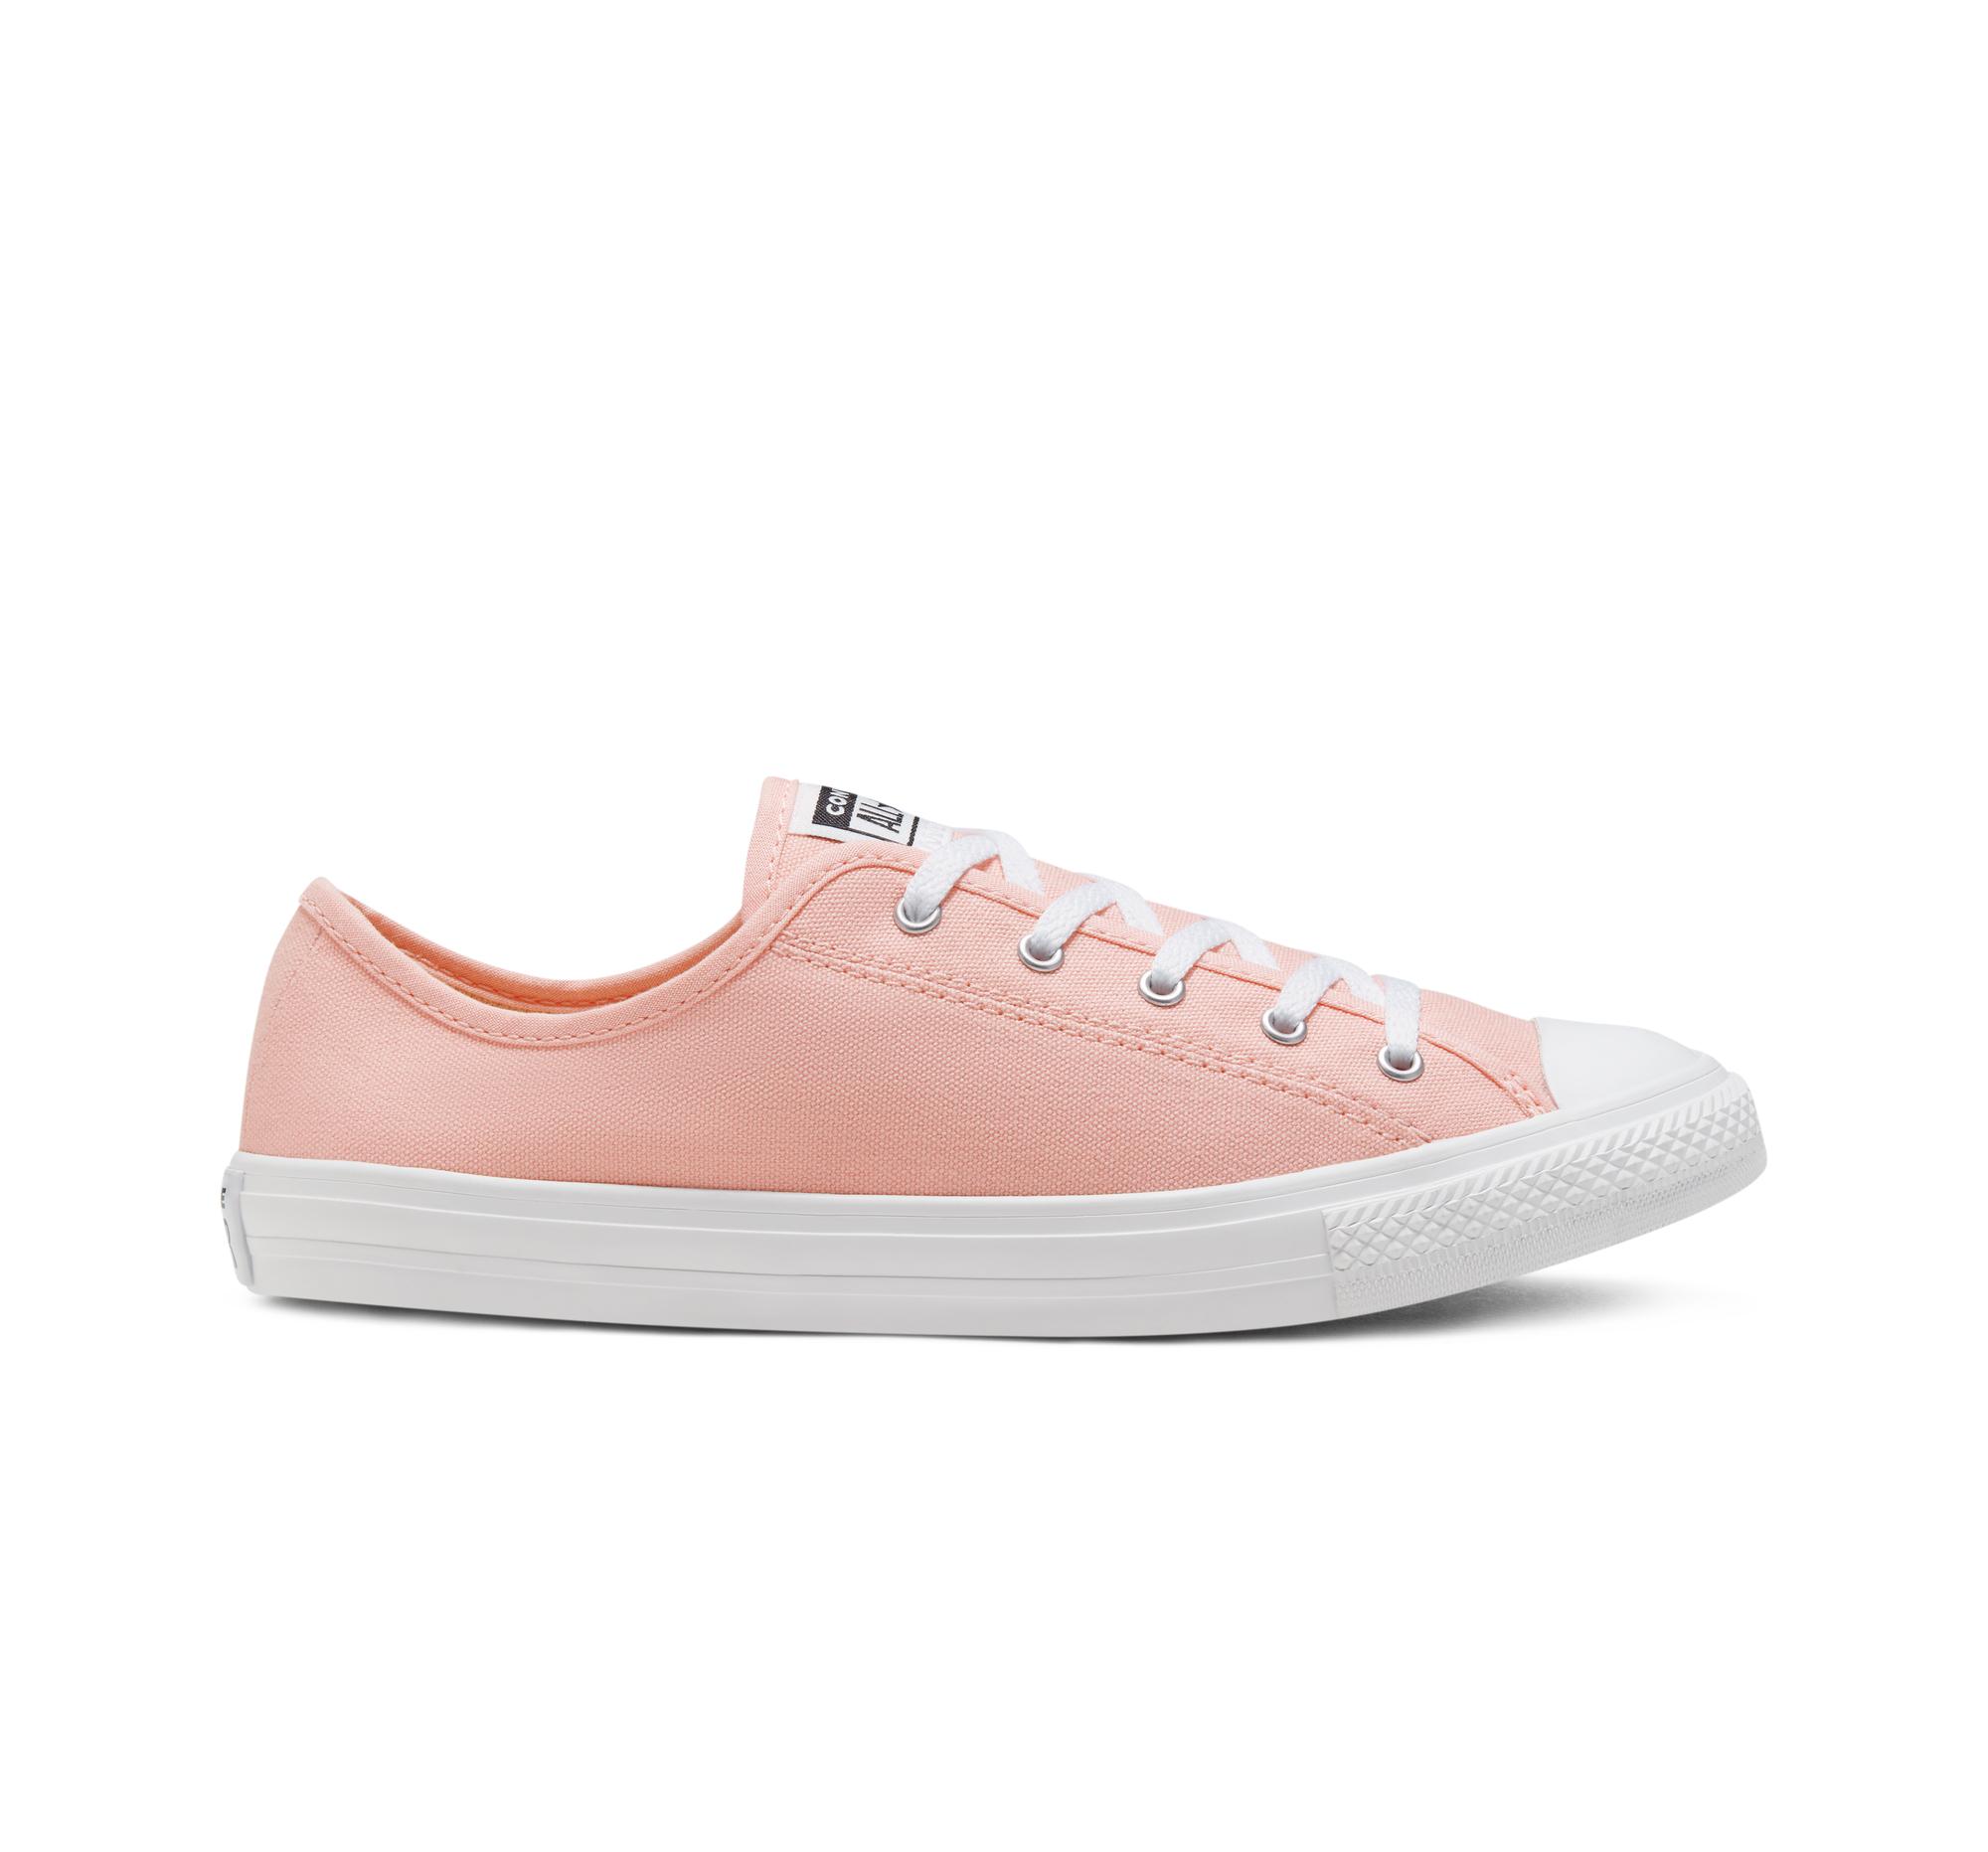 Converse Chuck Taylor All Star Dainty Sneaker in Rose Gold/White ... صبغة غارنييه اشقر رمادي فاتح جدا